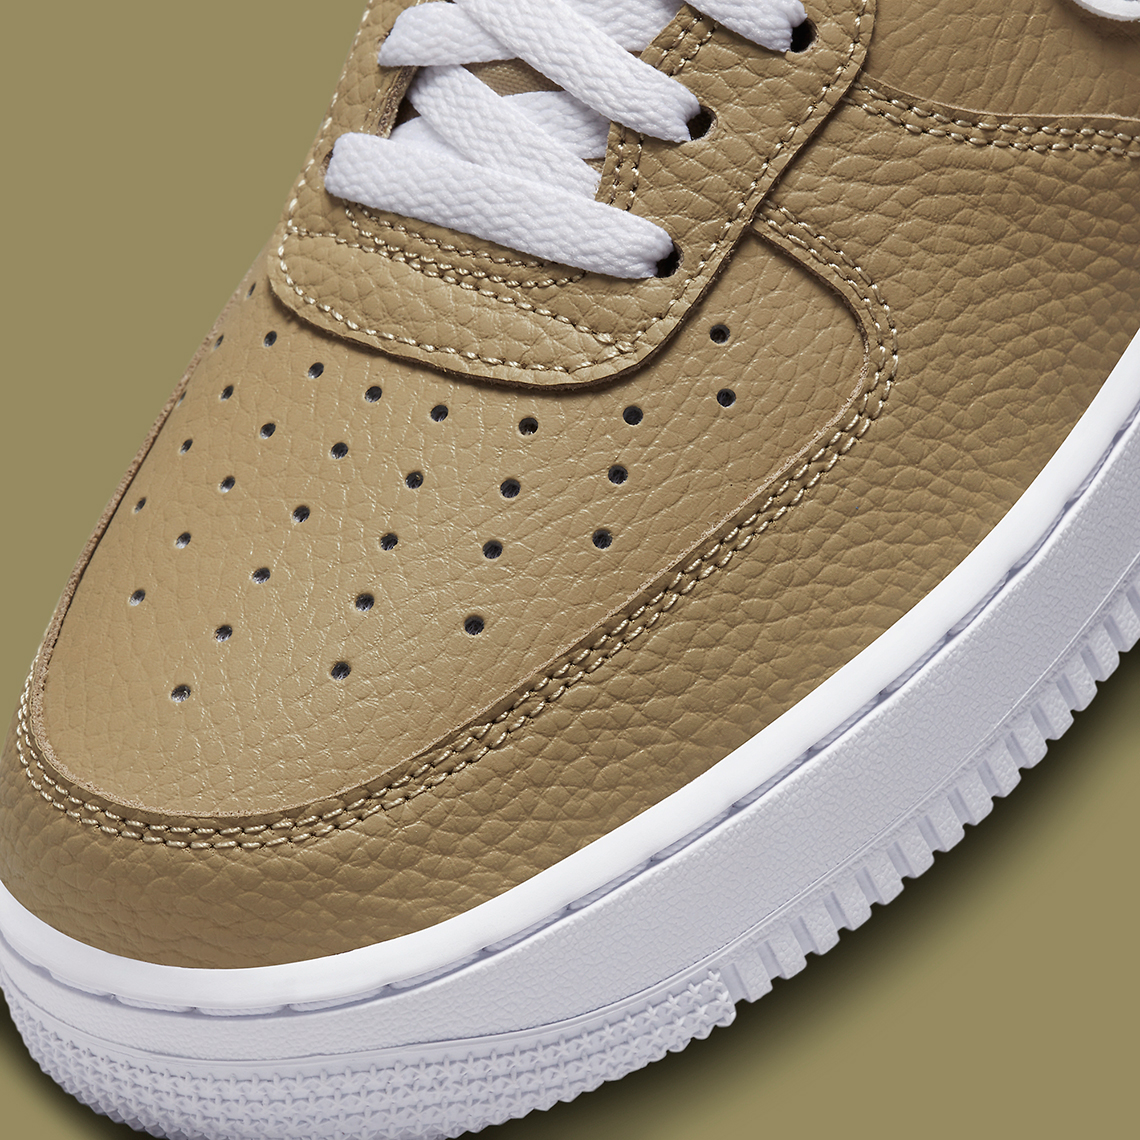 Nike Air Force 1 Low Olive DV0804-200